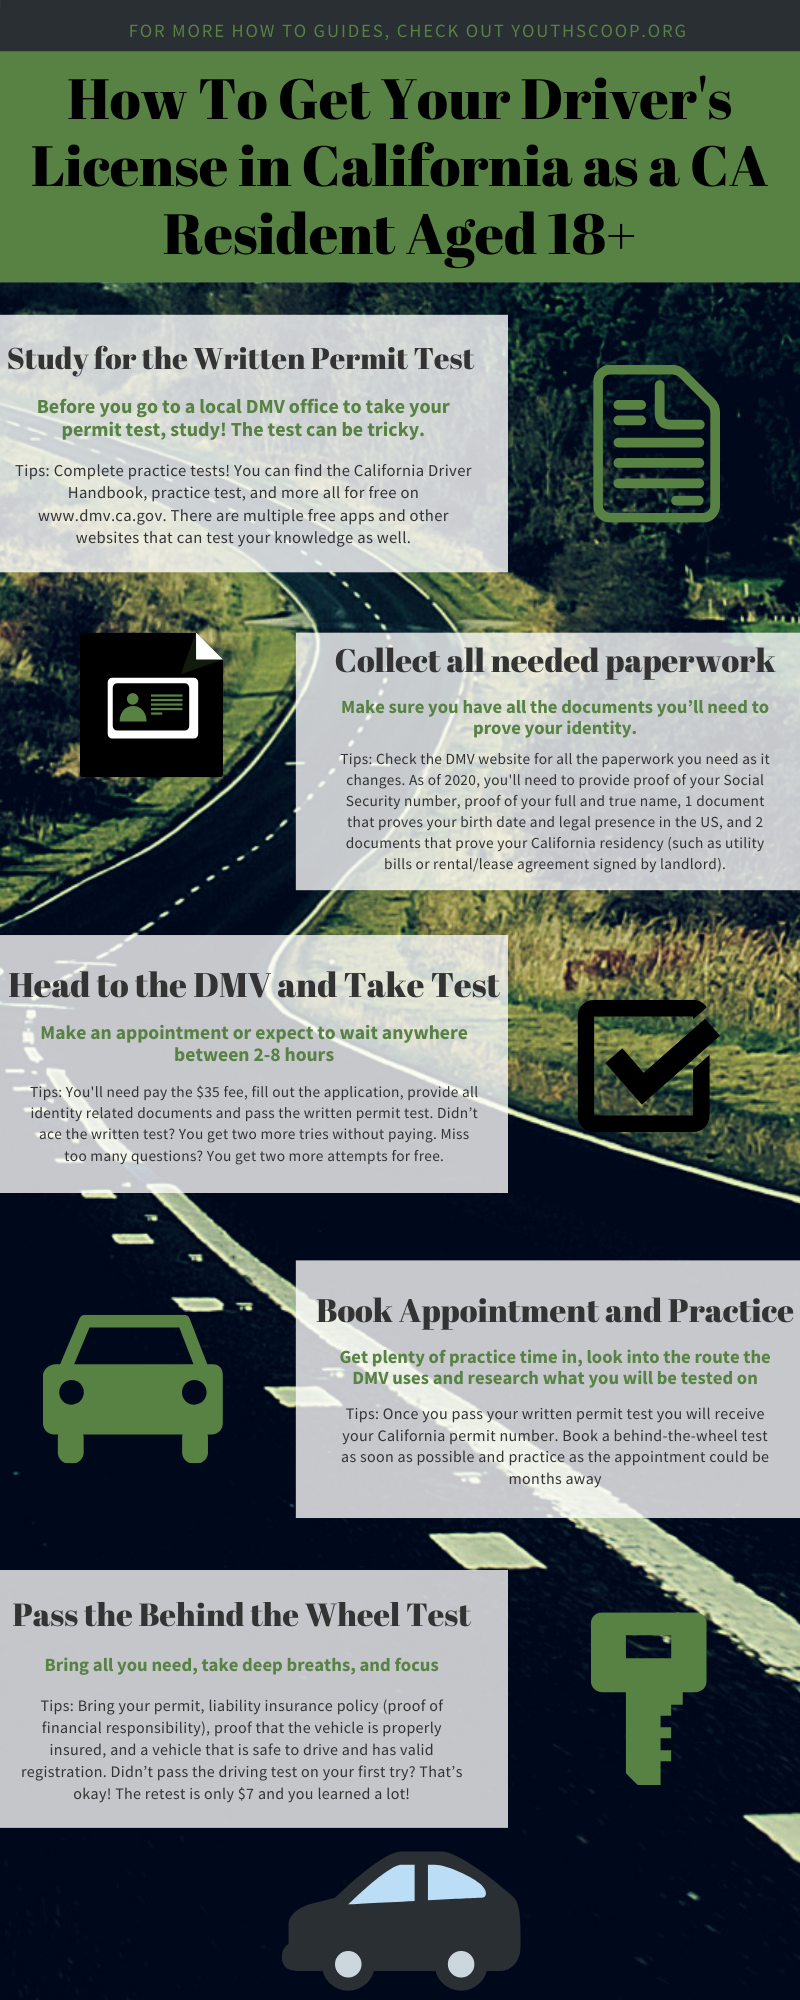 Home Page - WIDOT Driver License Guide